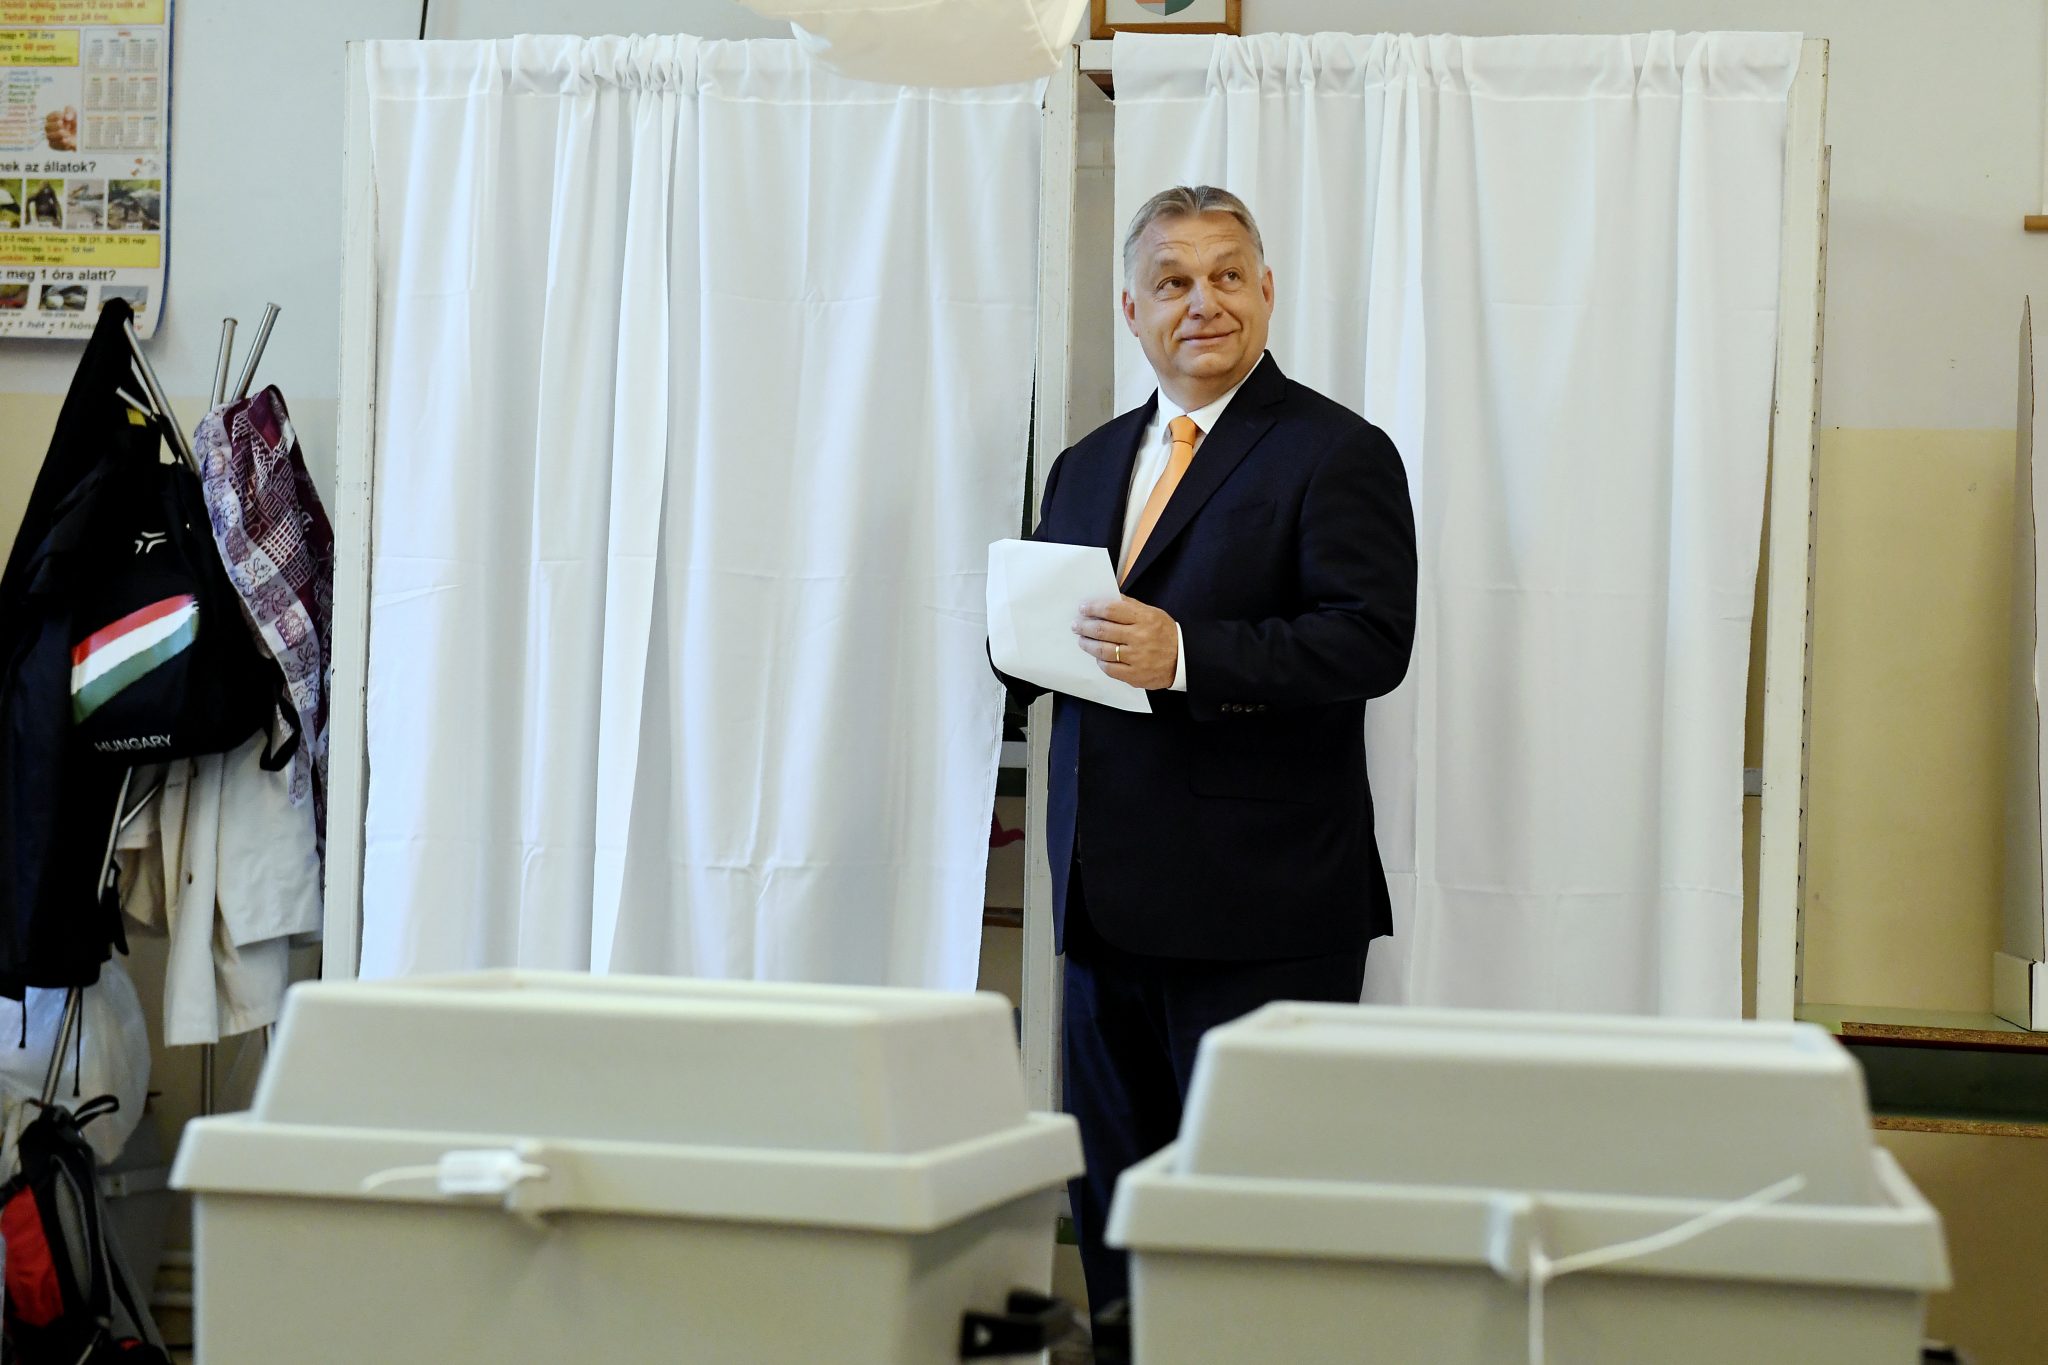 Fidesz Victory Very Likely, According to Final Polls before Election